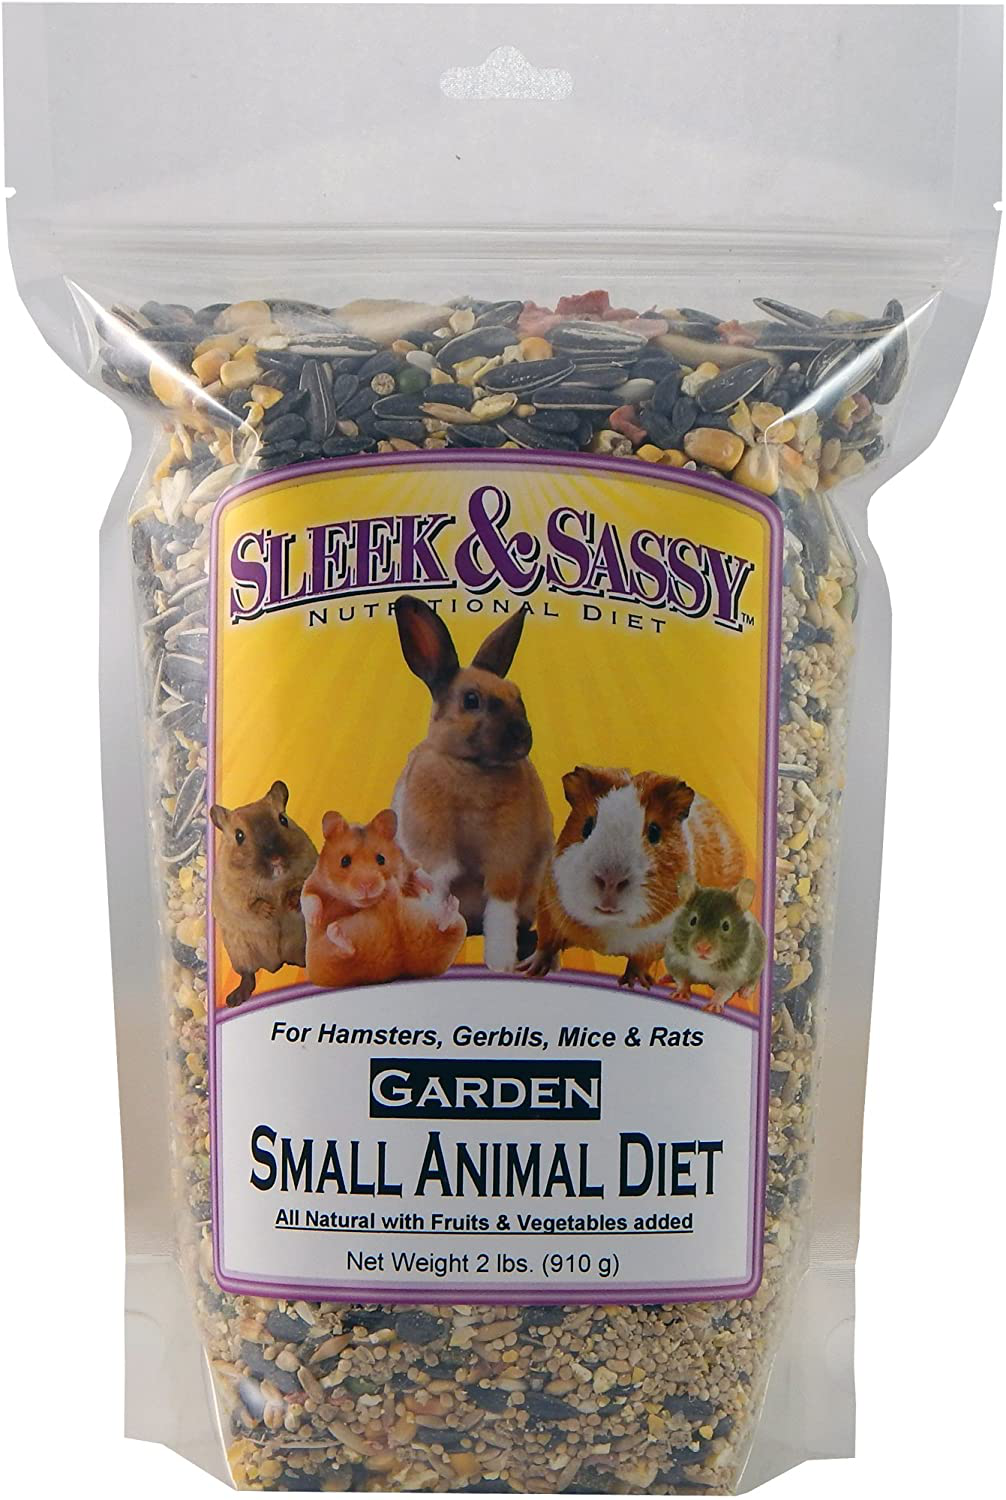 Garden Small Animal Food for Hamsters, Gerbils, Mice & Rats